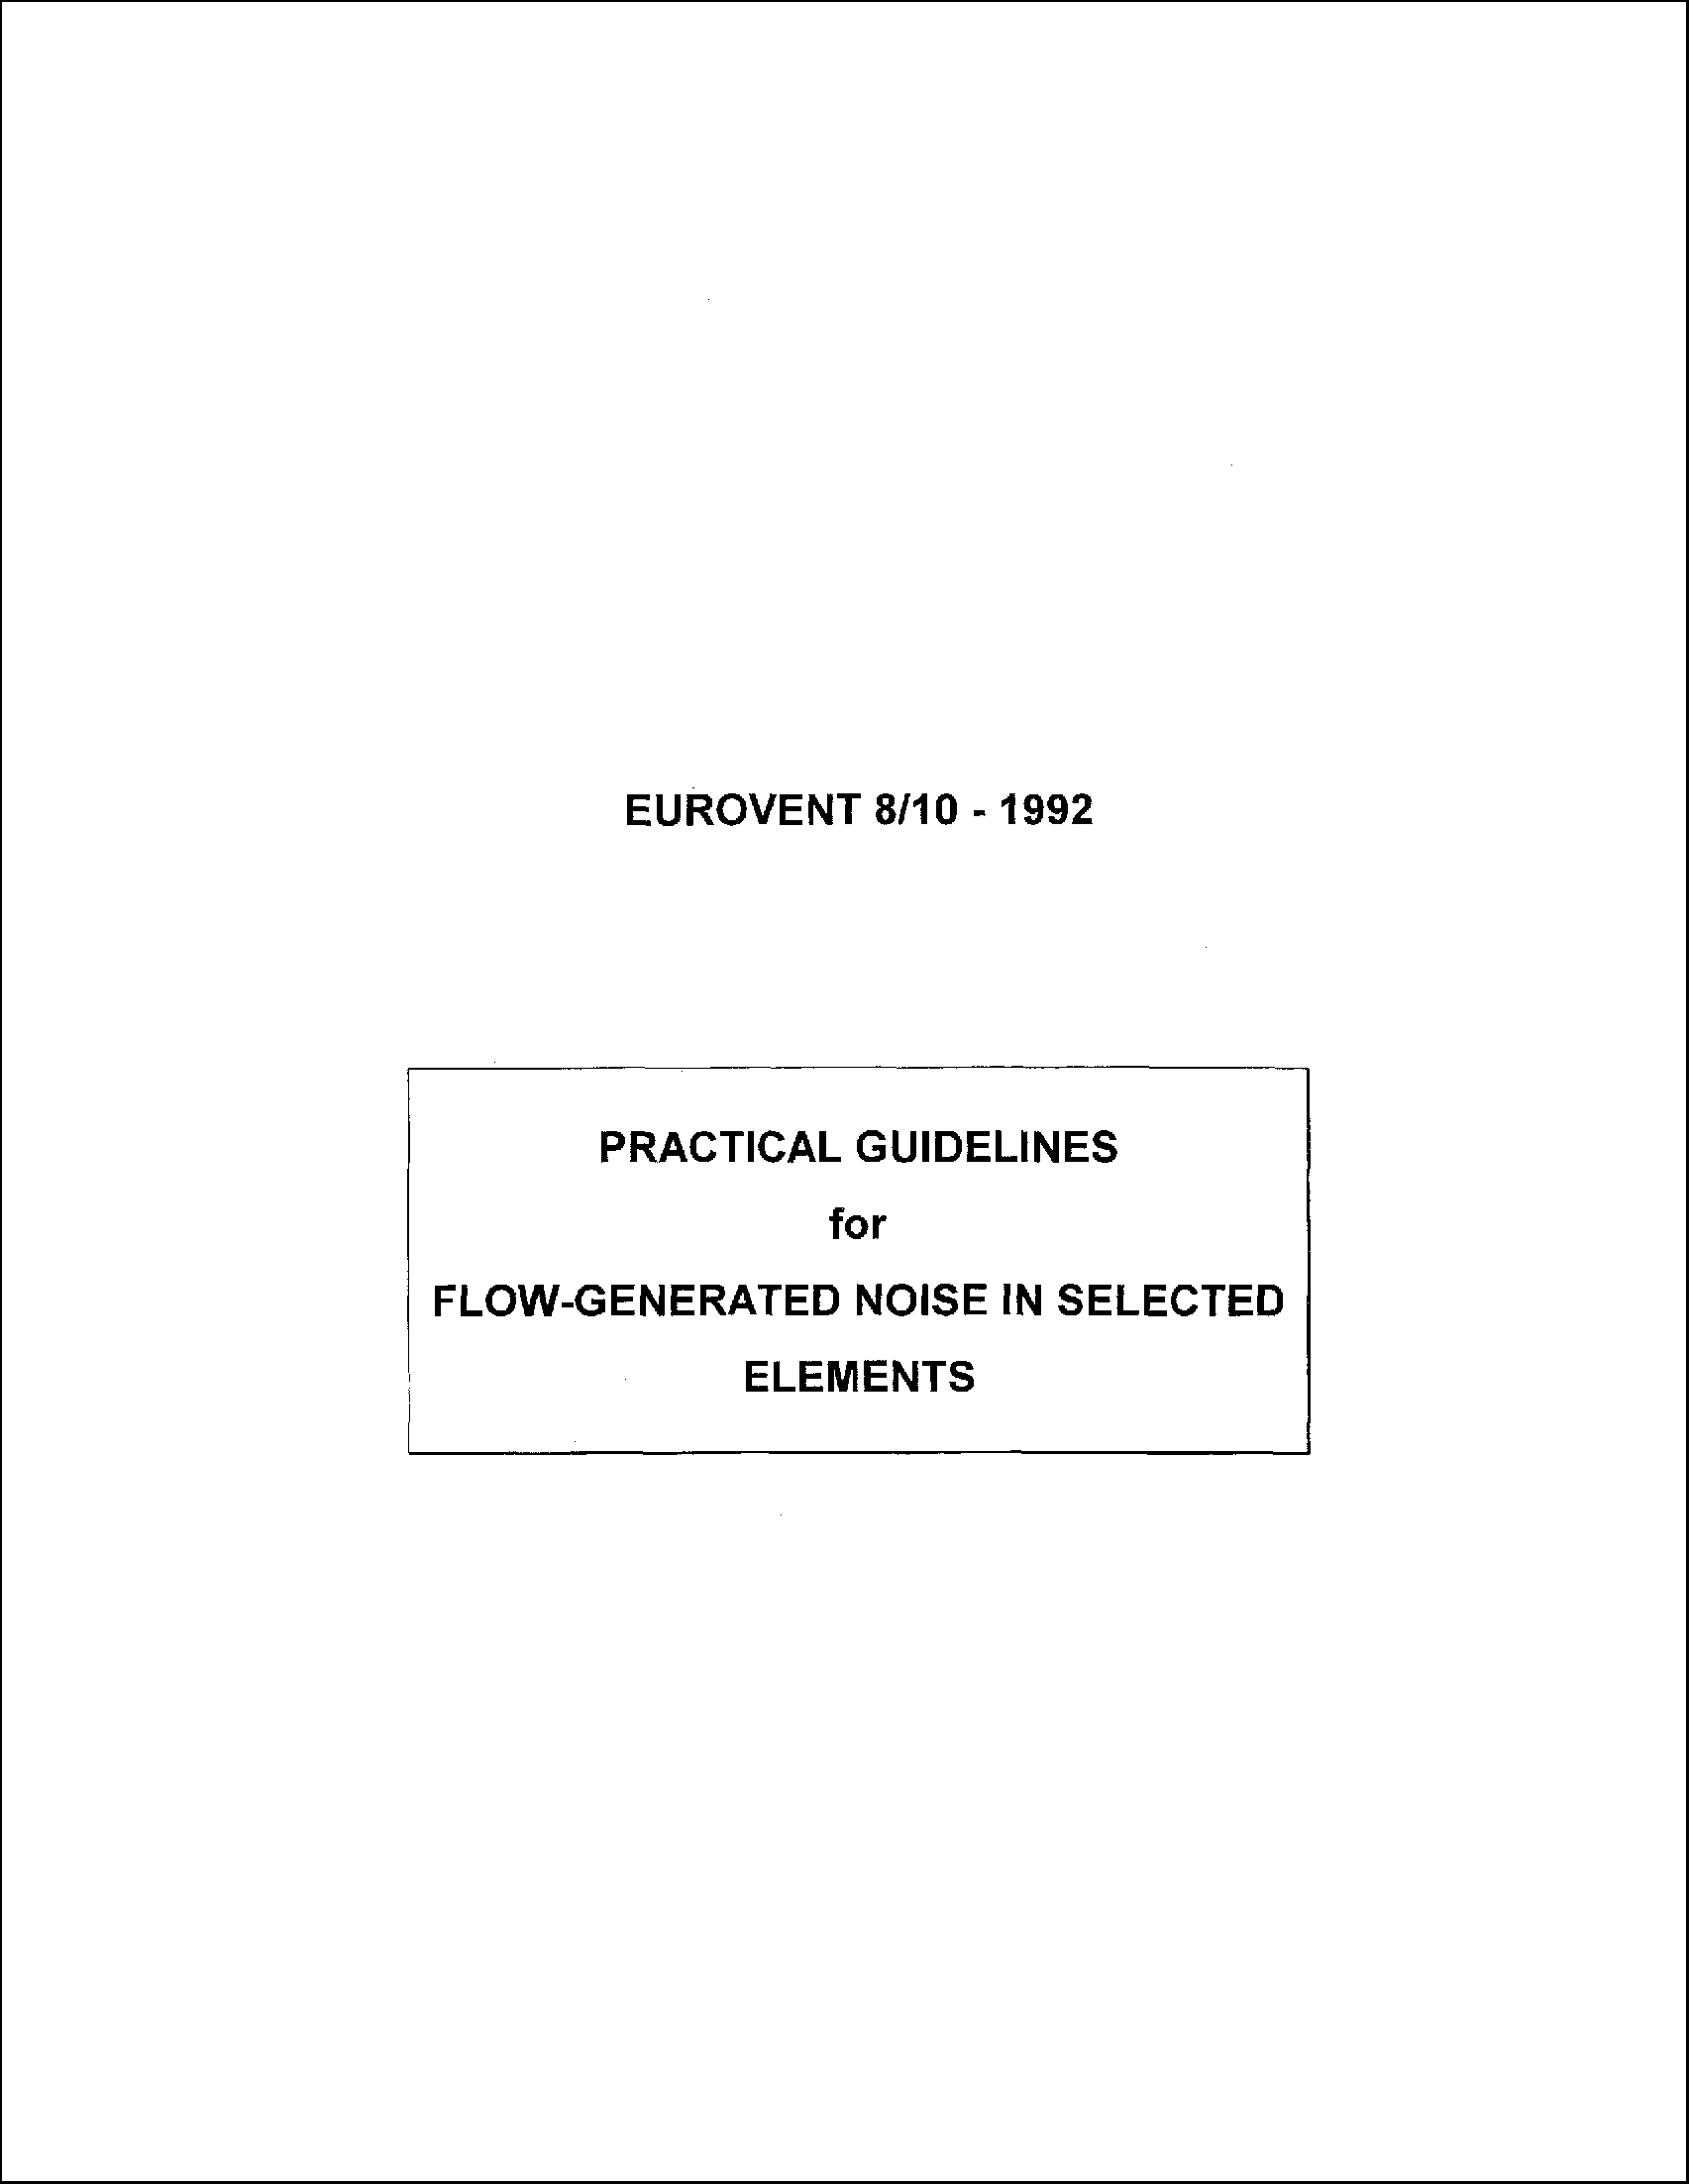 1992 - Practical guidelines for flow-generated noise in selected elements